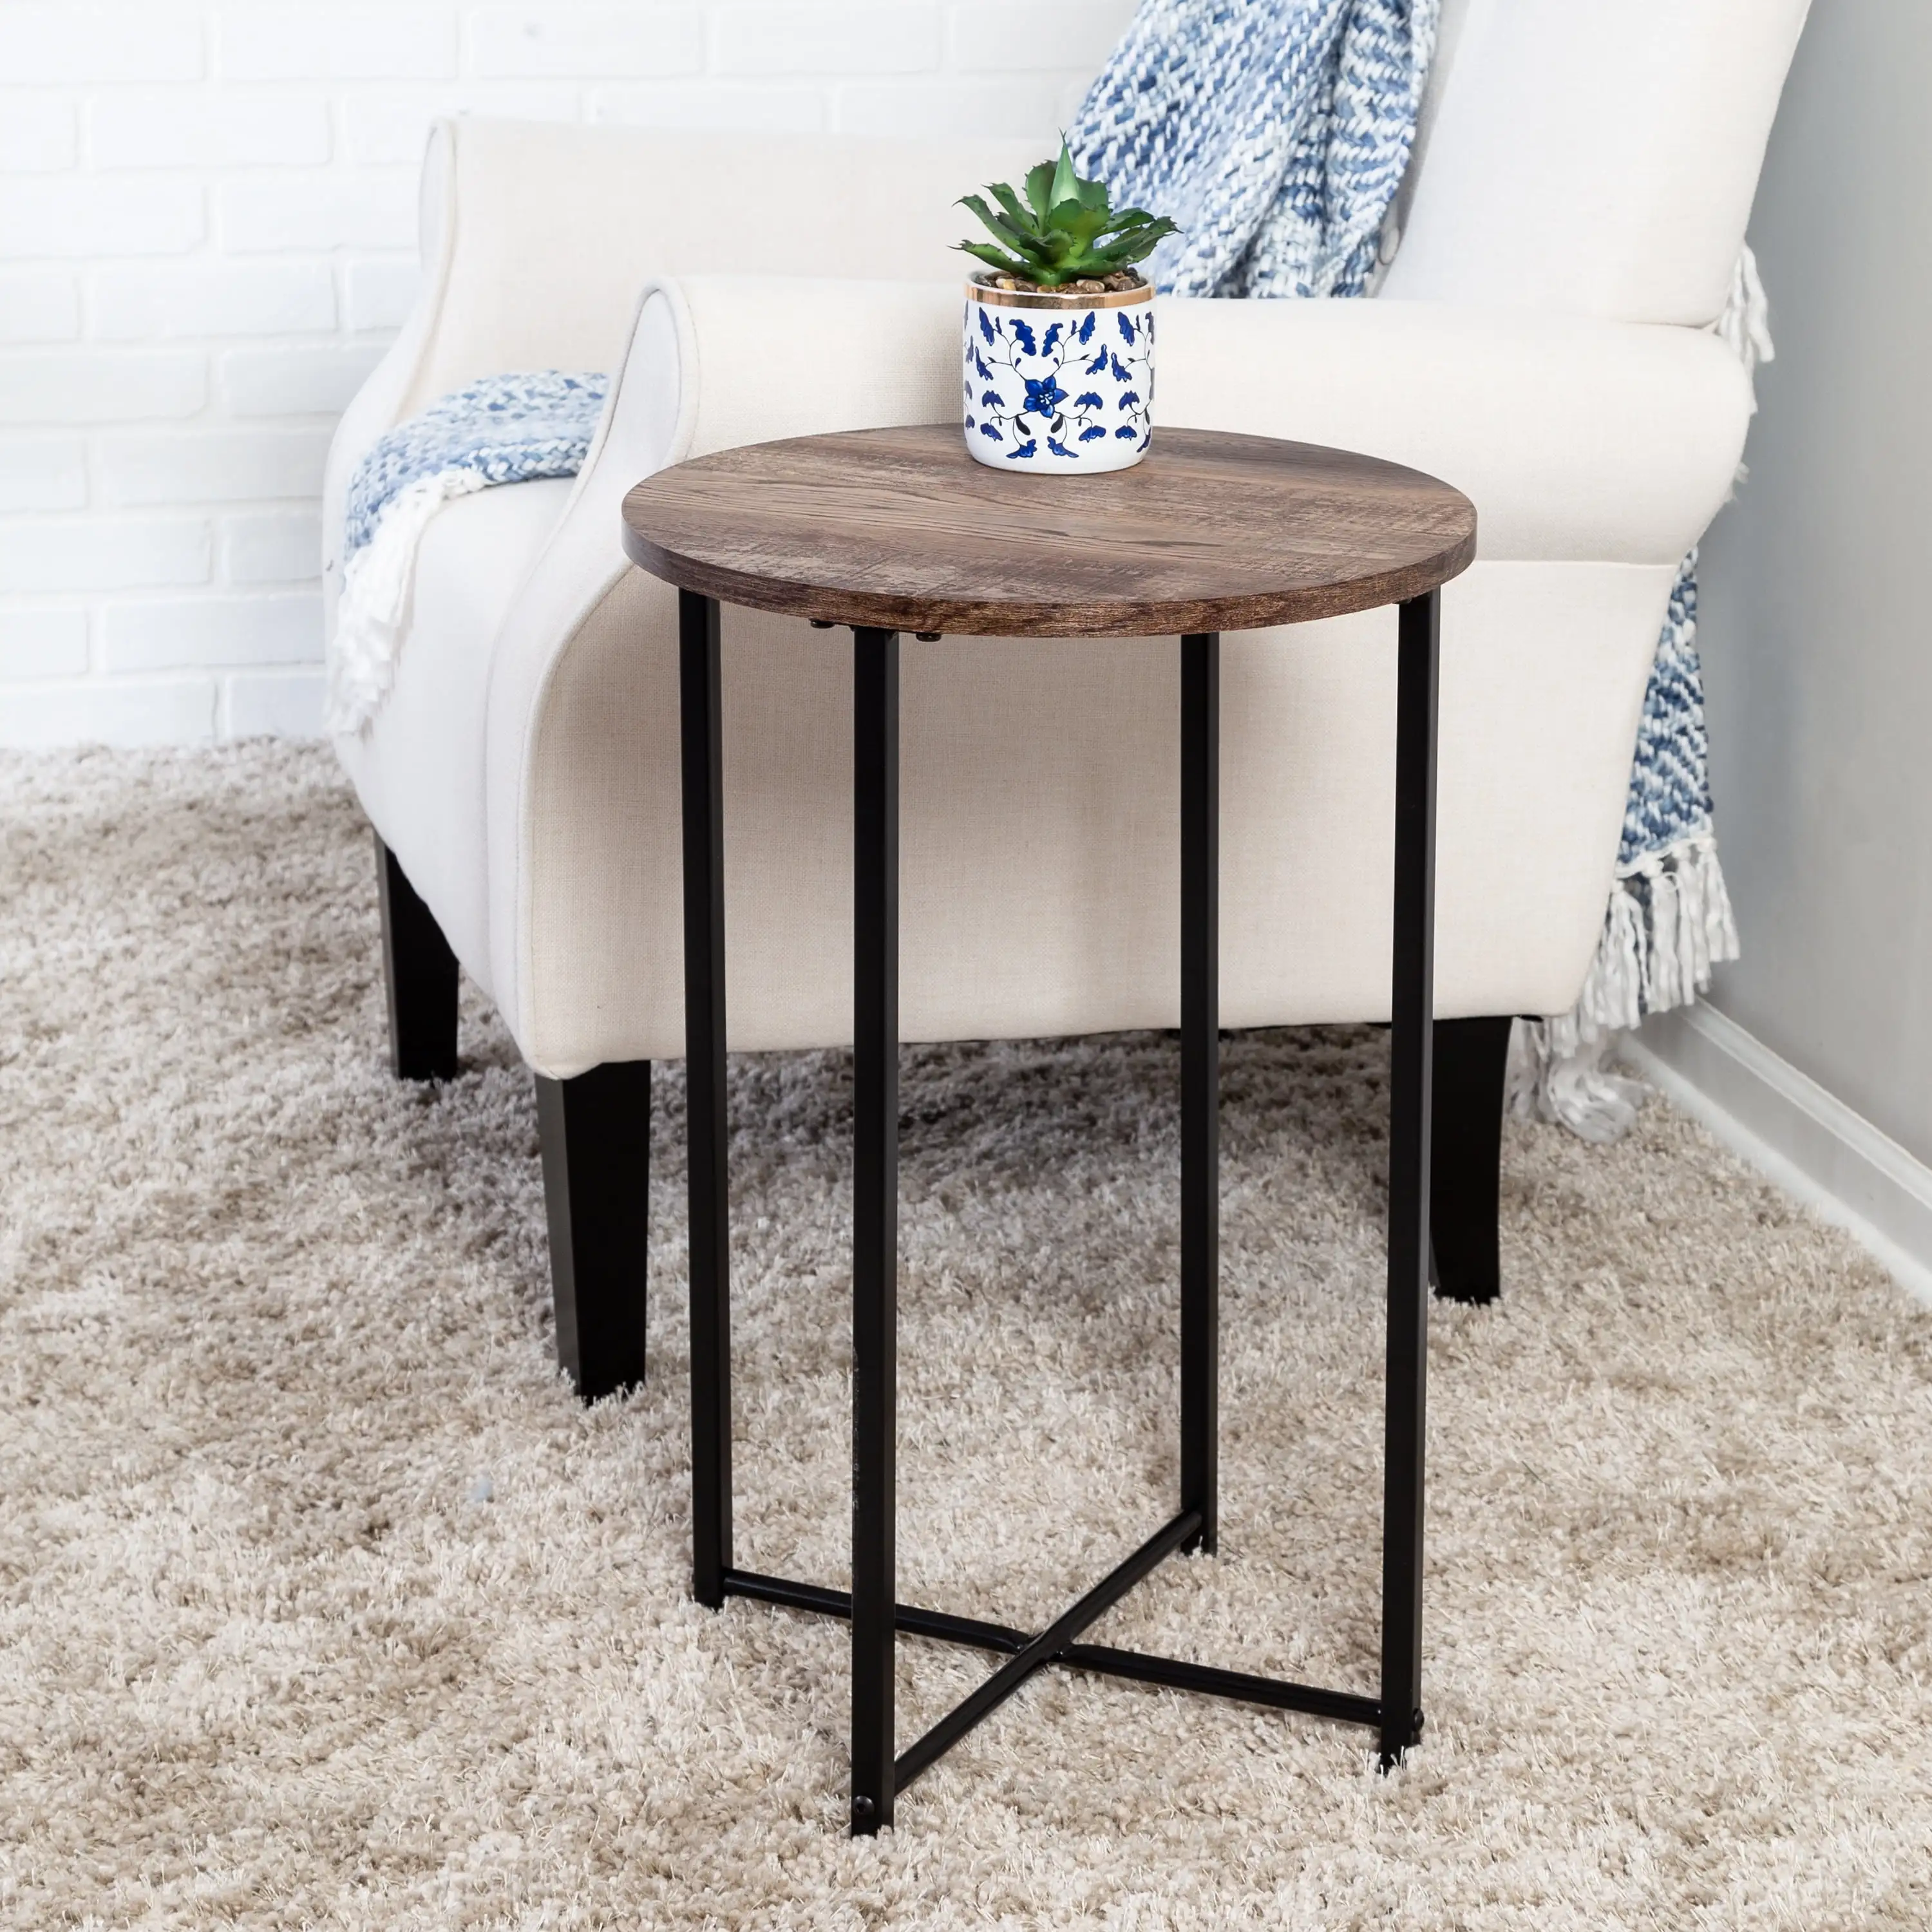 

Honey-Can-Do Steel and MDF Round Side Table with X-Pattern Base, Black/Natural